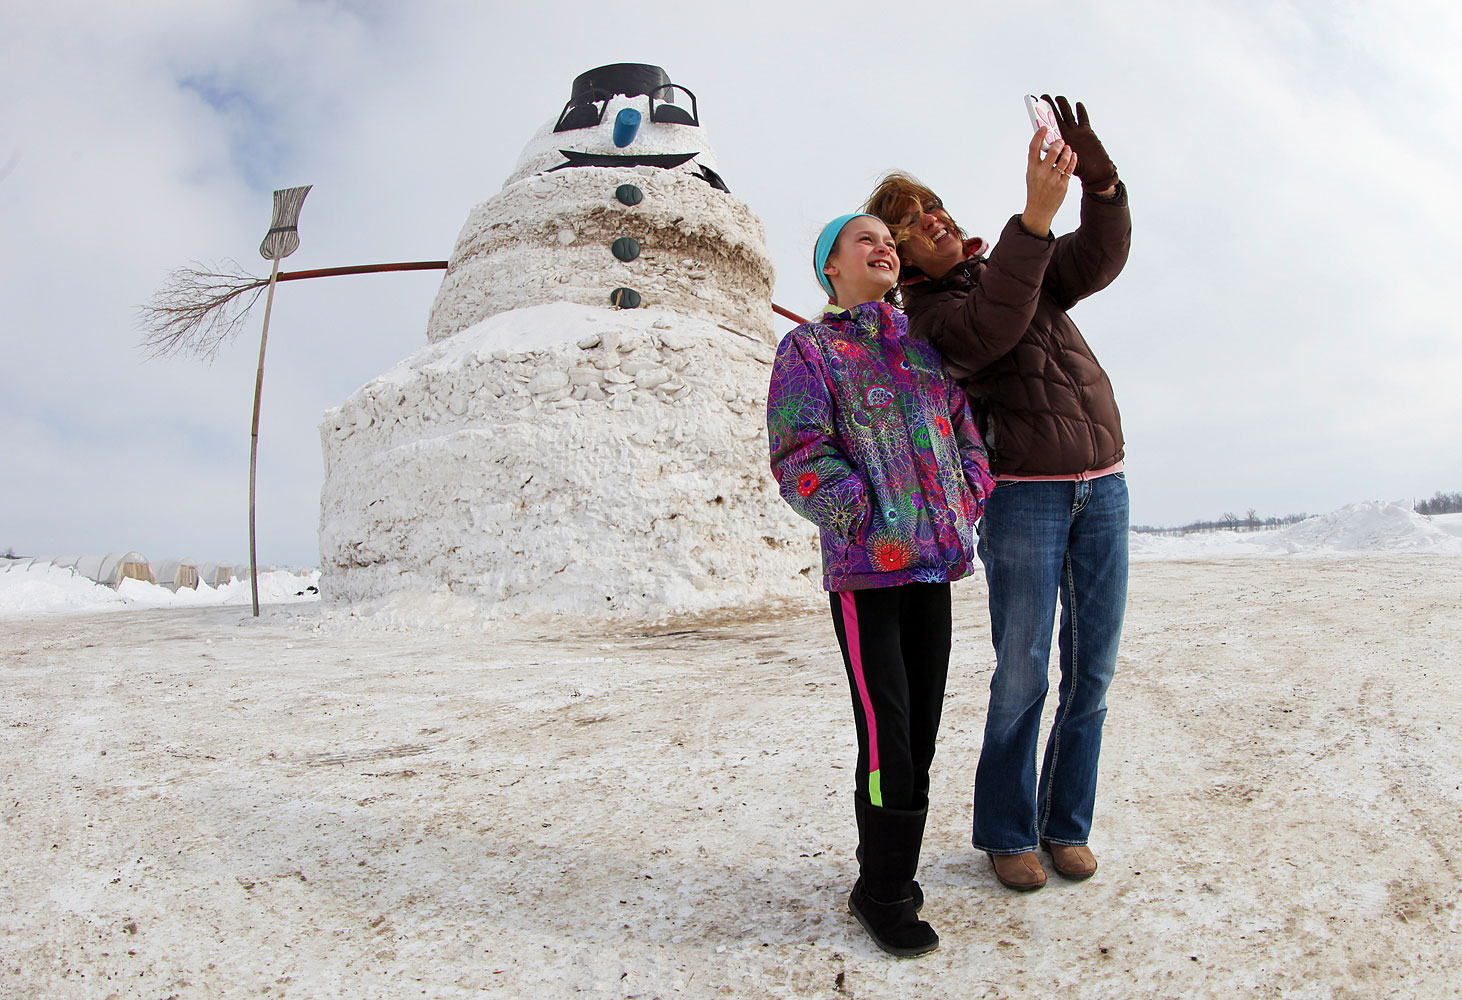 Mother and daughter photograph themselves in front of 50 foot snowman in Minnesota